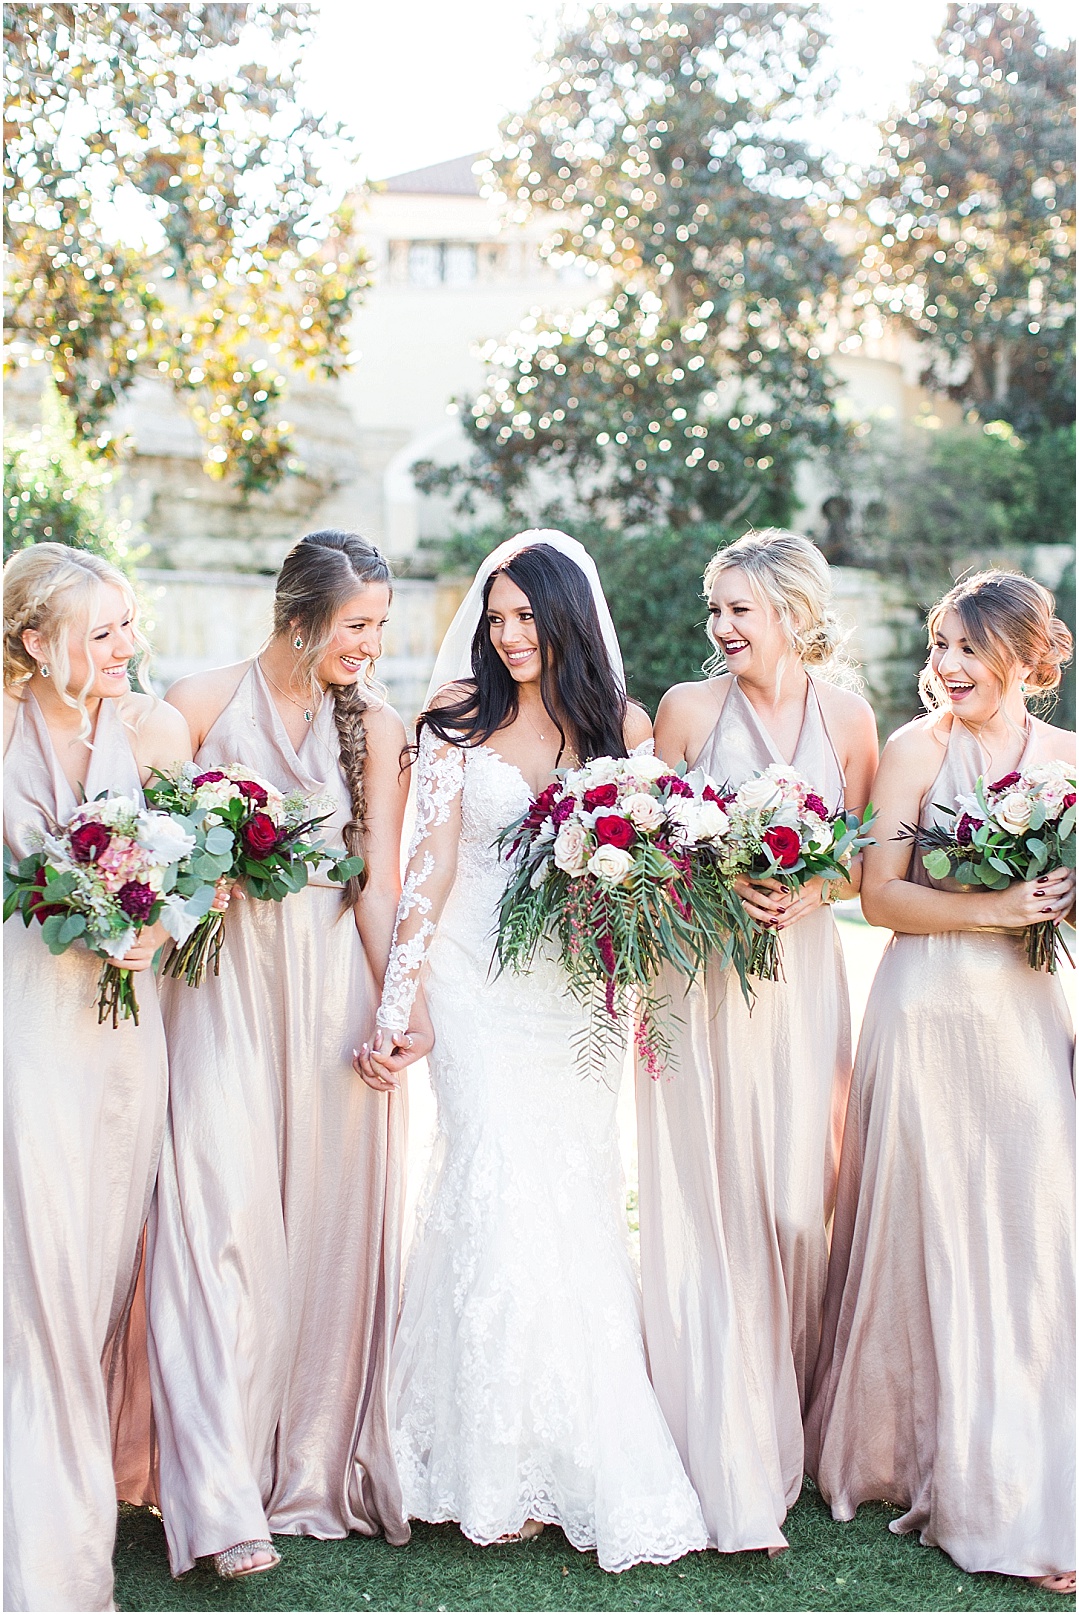 For Galentine s A Few Favorite Bride and Bridesmaids  Moments angelakingphotography com